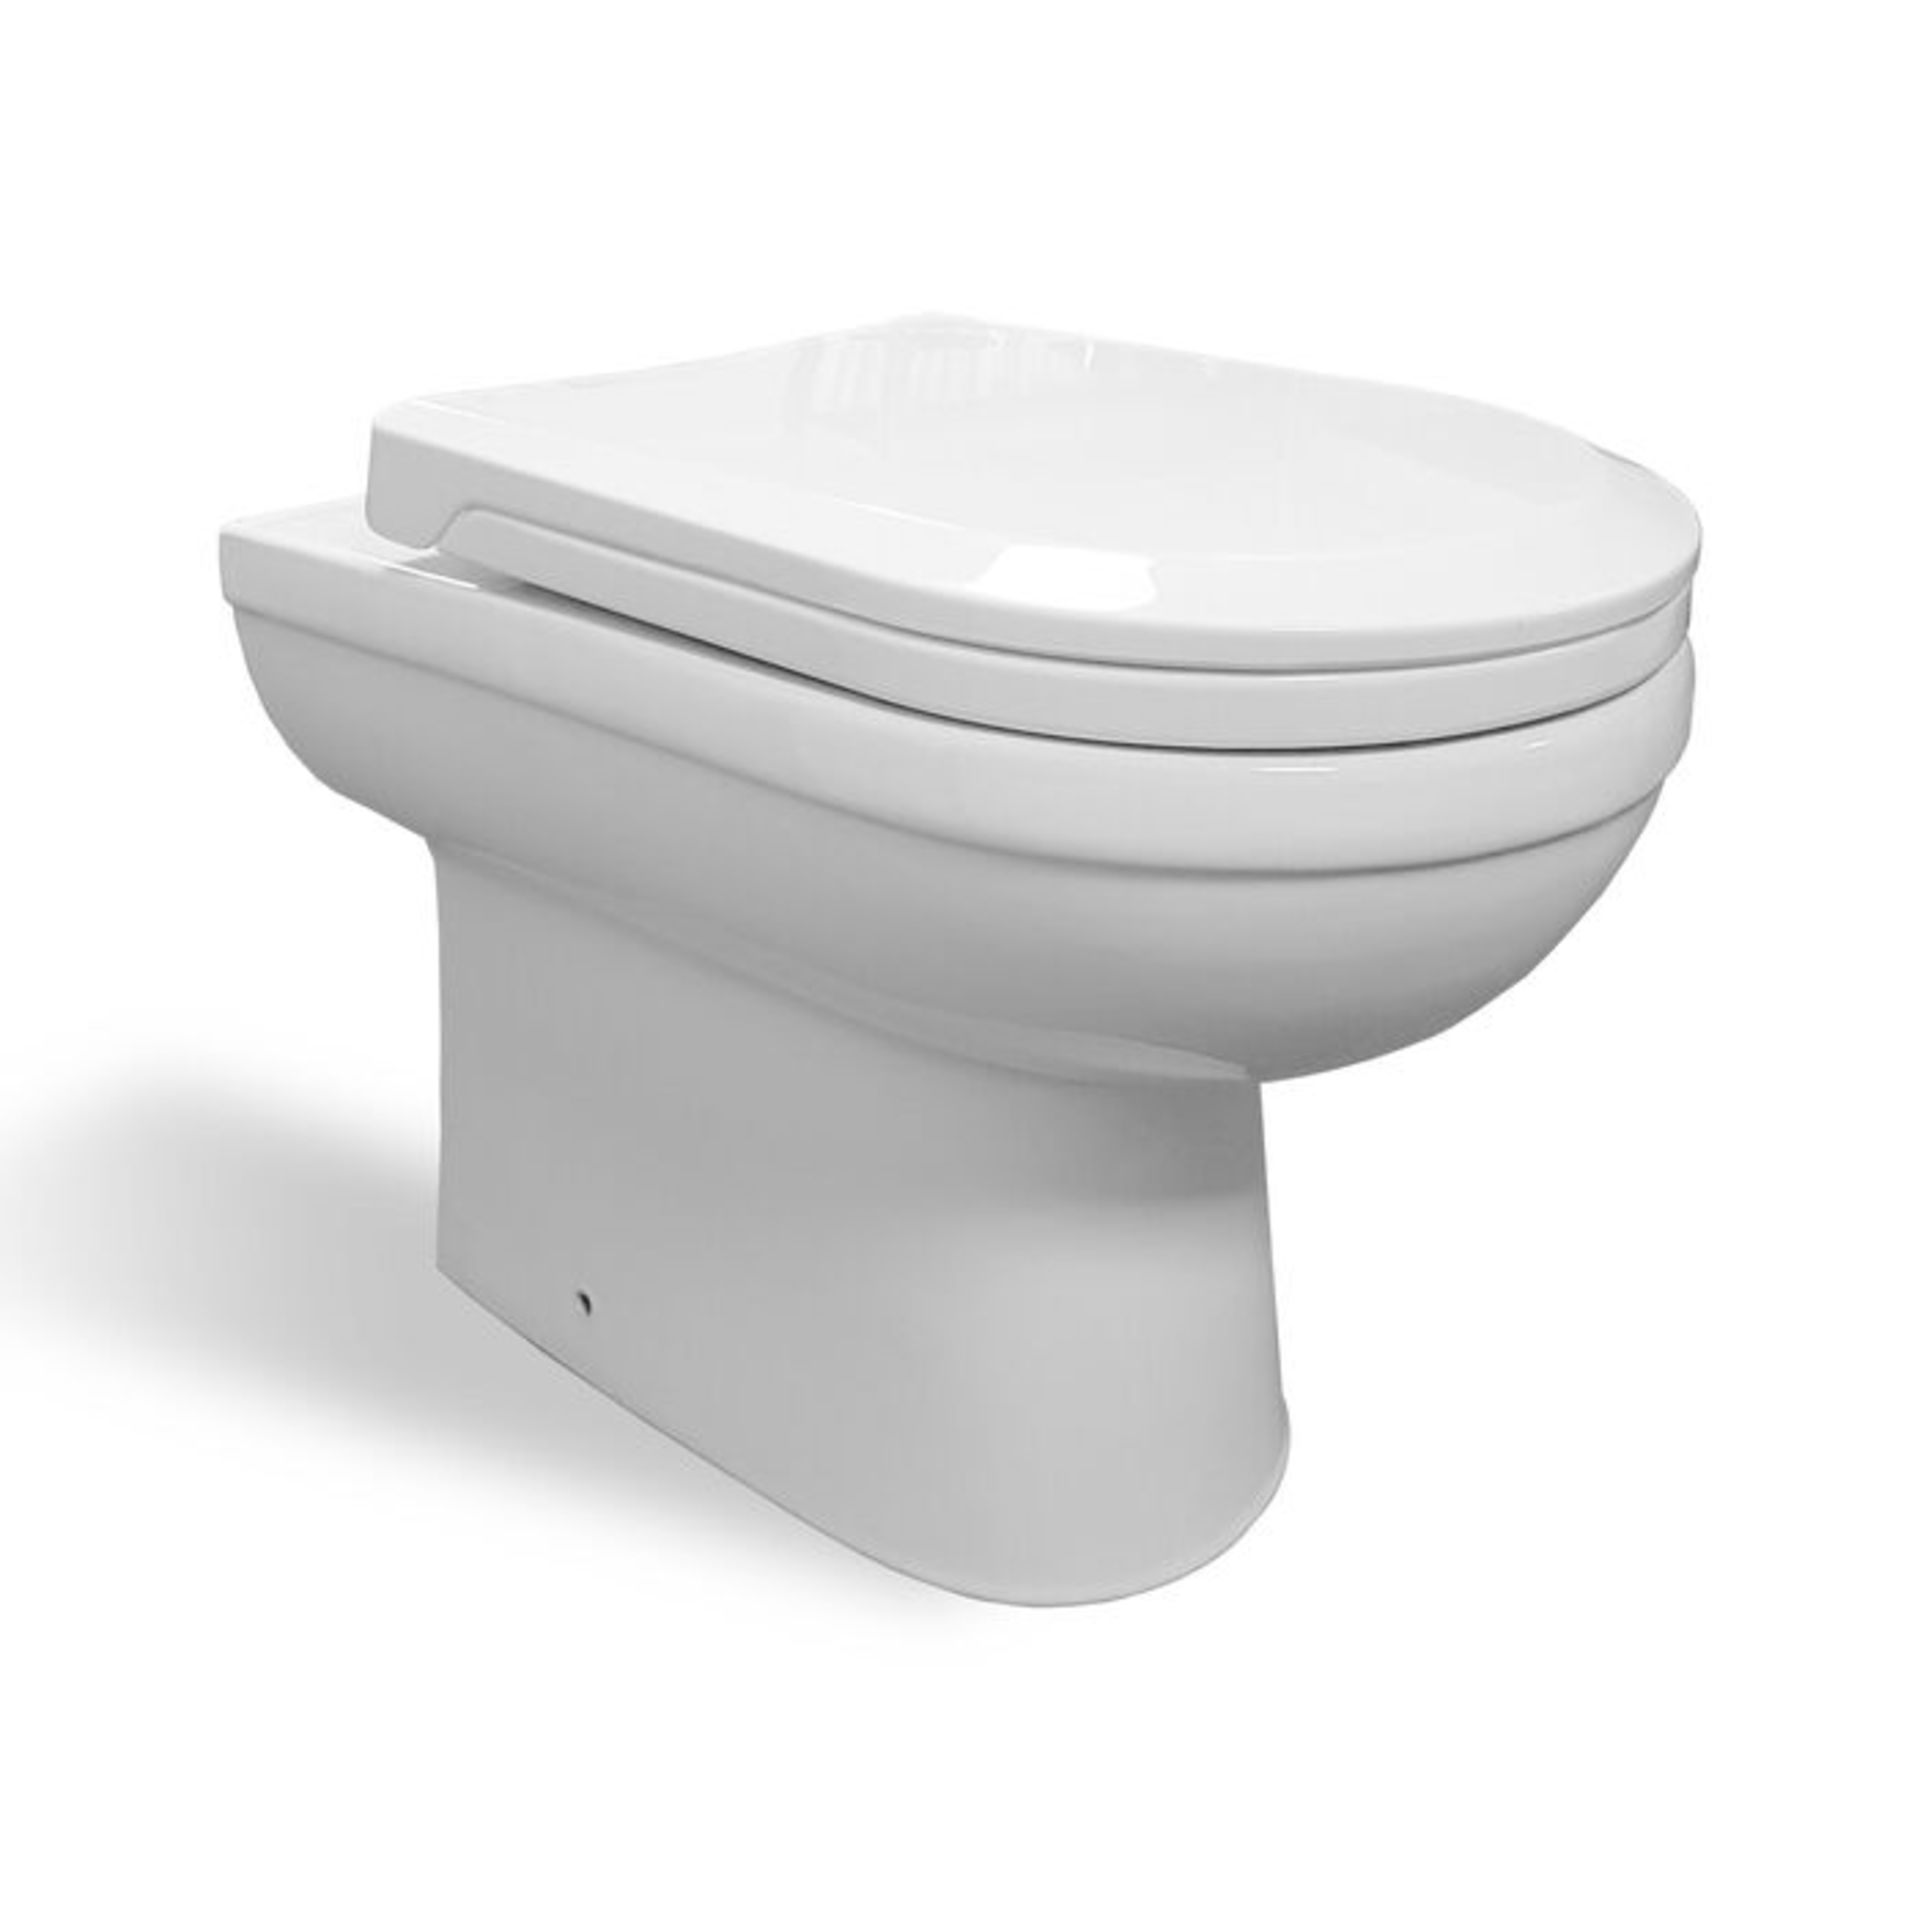 (CC74) Sabrosa II Back To Wall Toilet with Soft Close Seat Made from White Vitreous China and ... - Image 3 of 3